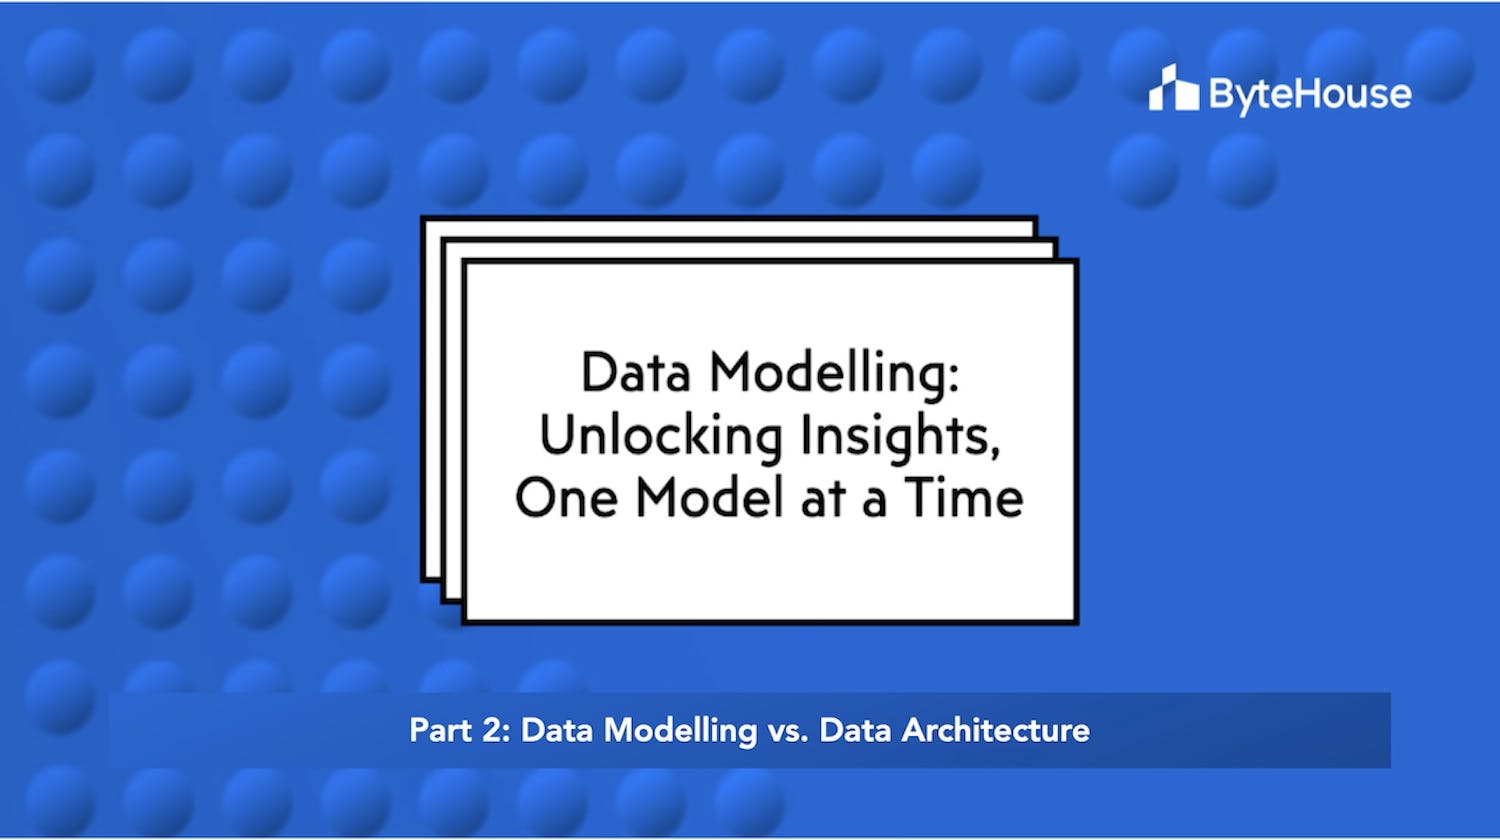 Data modelling vs. Data architecture: What's the difference?